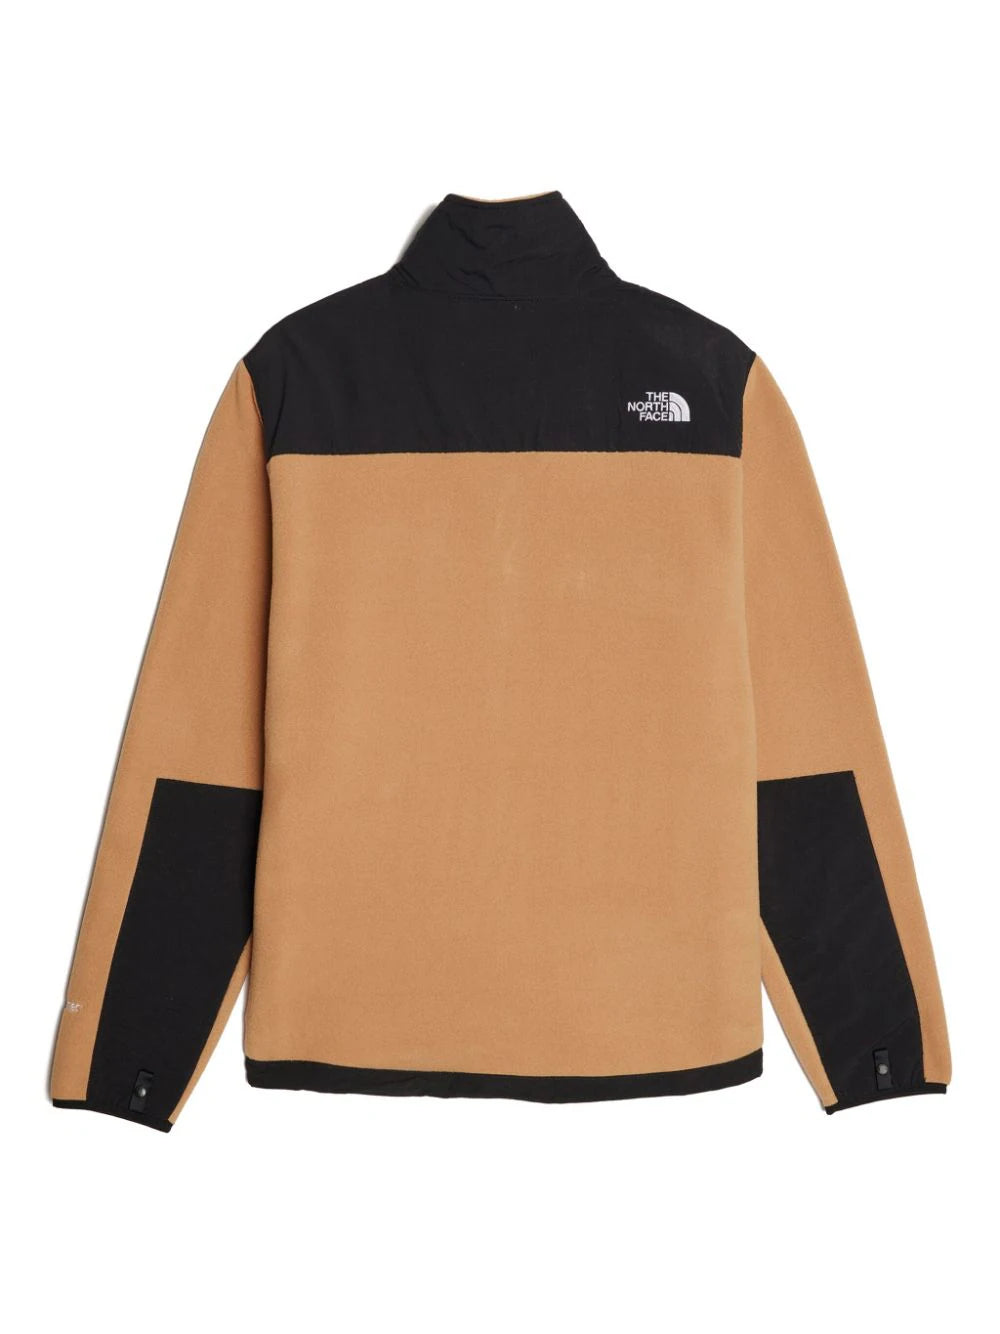 Polaire marron The North Face femme taille M - The North Face